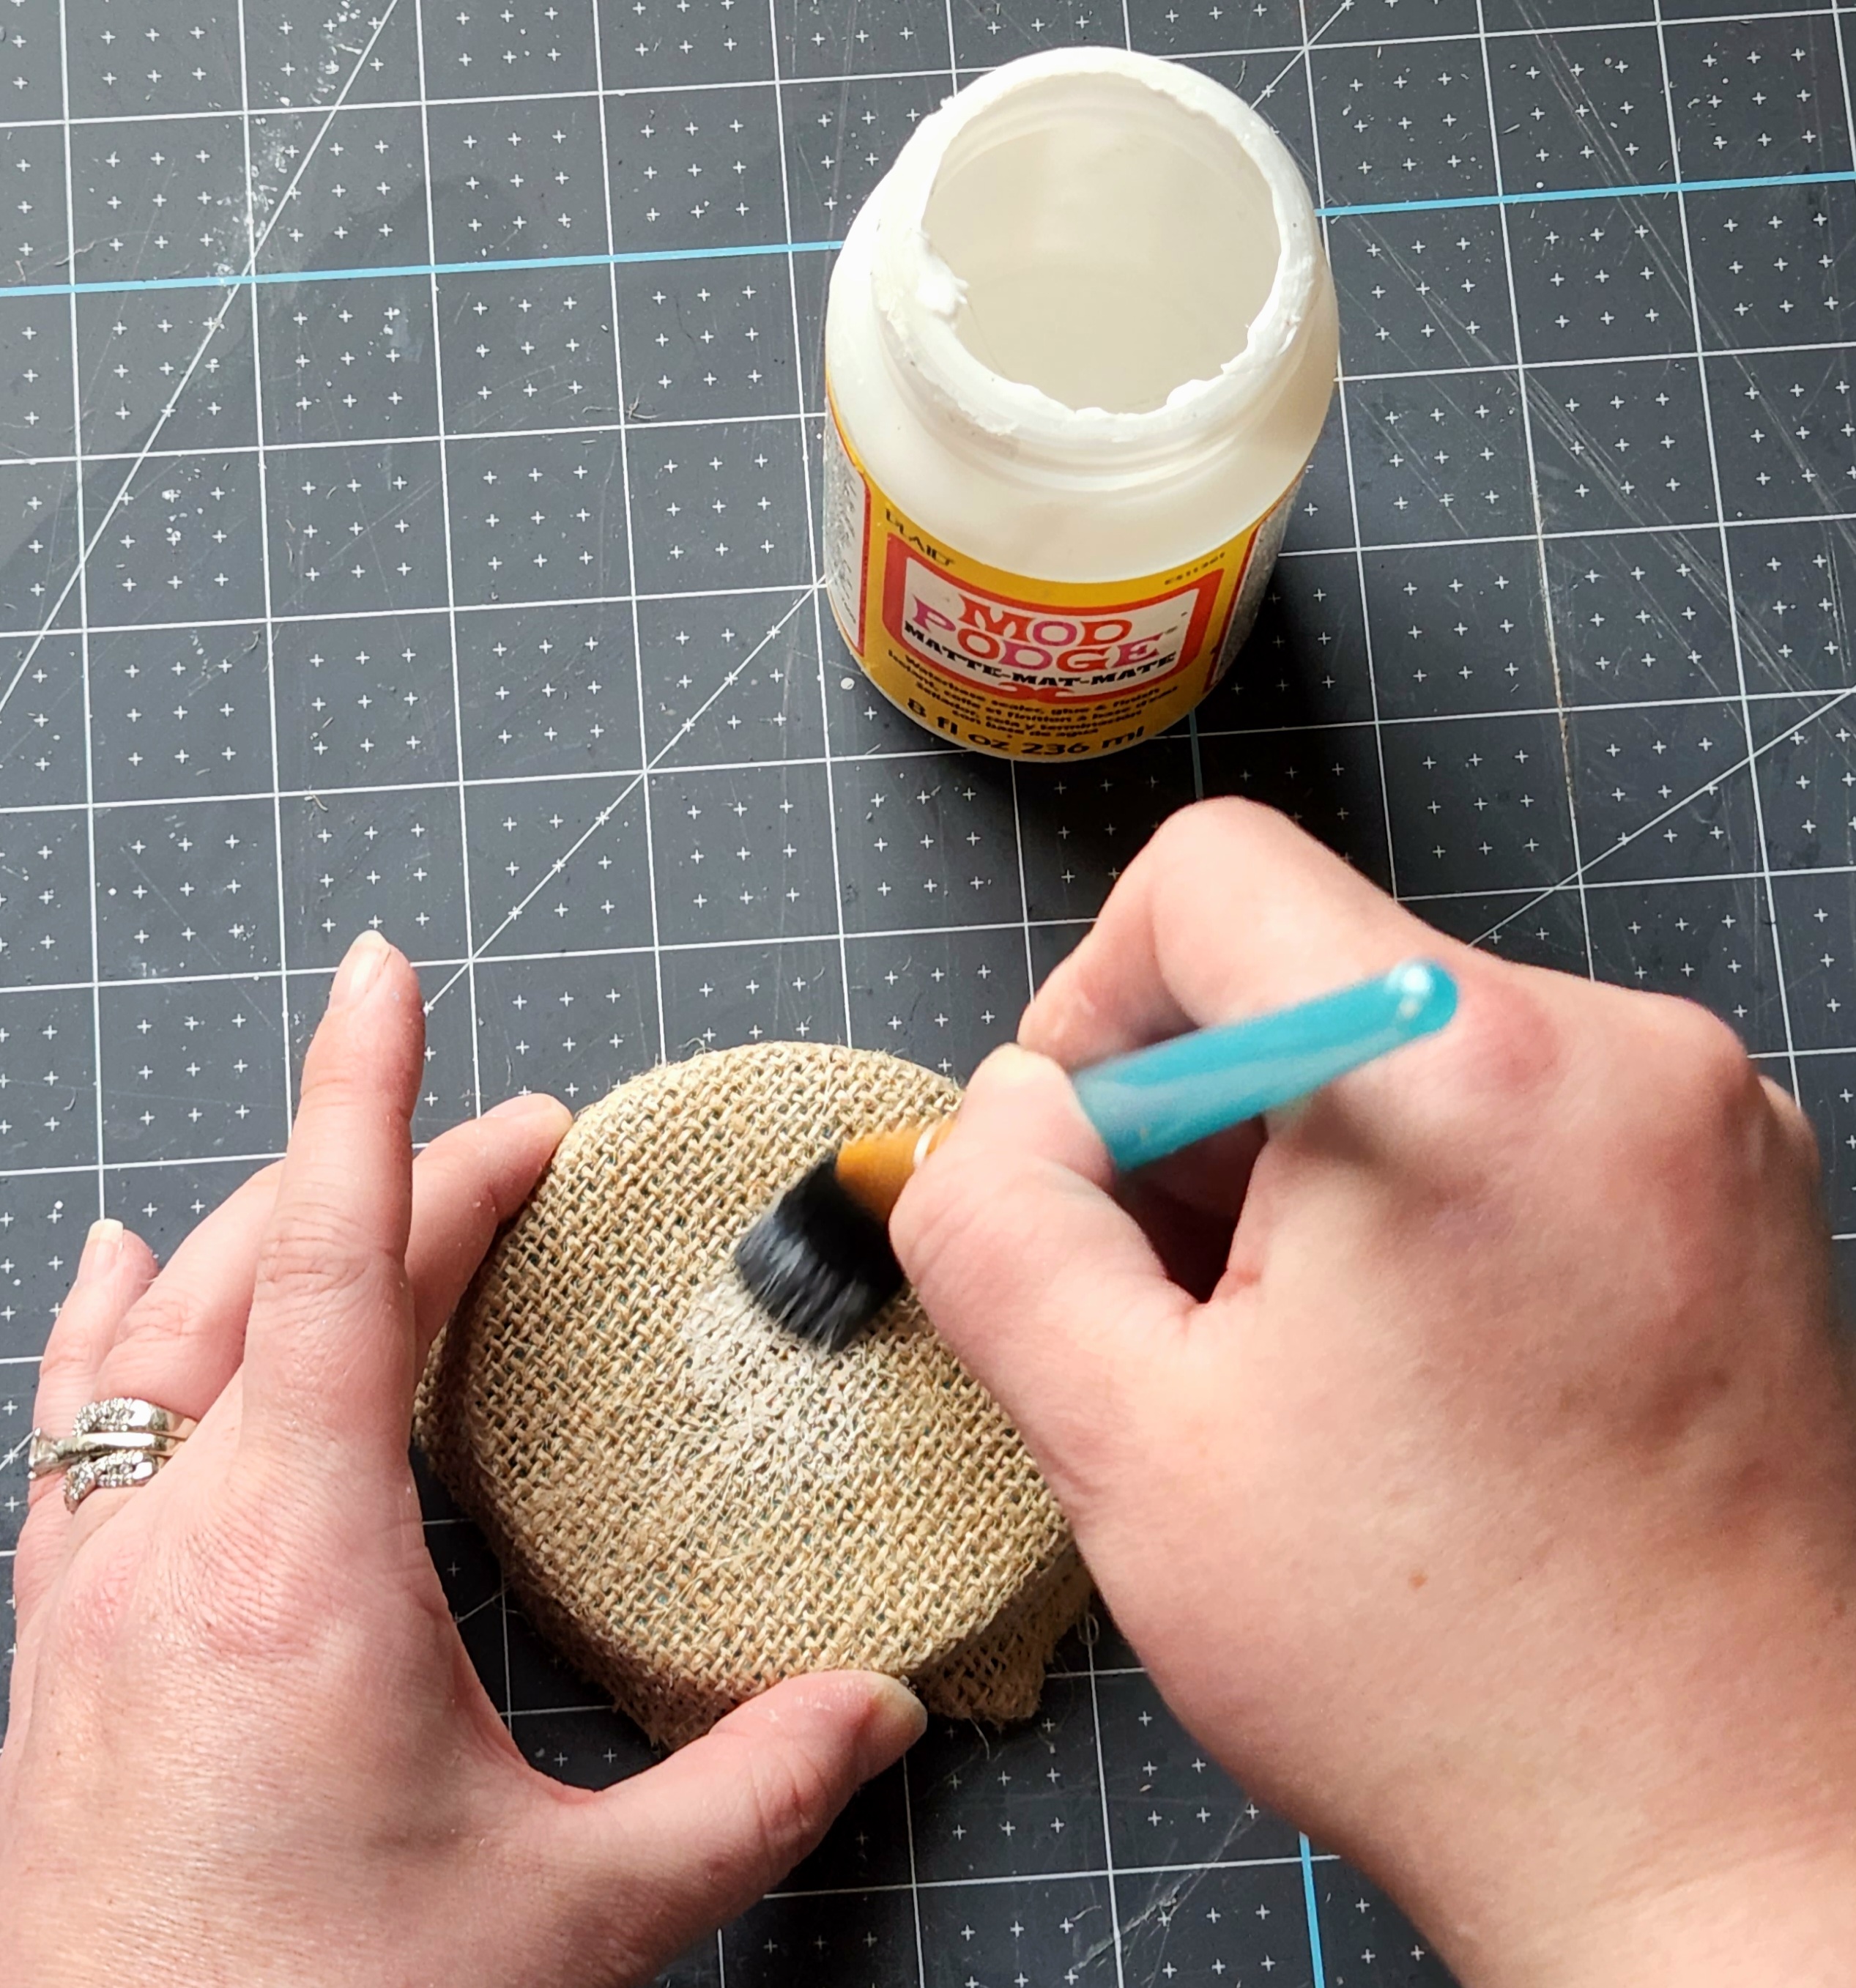 Adding Mod Podge to the top of the jar lid covered in burlap.